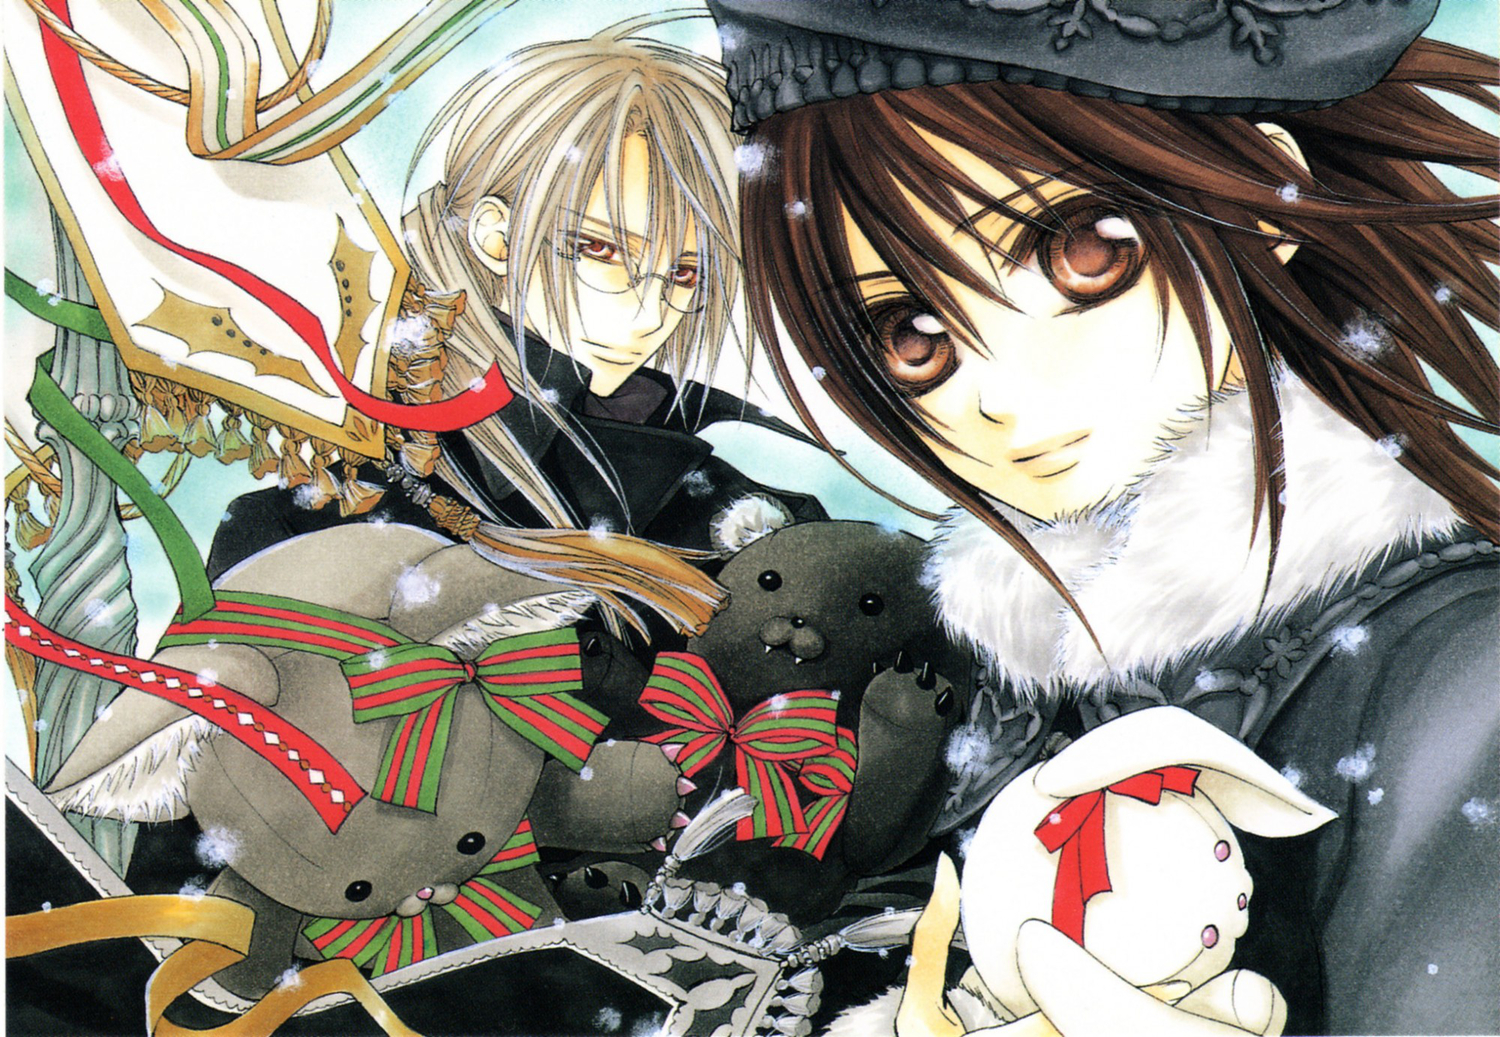 Anime character from Vampire Knight standing in the snow on a winter day.